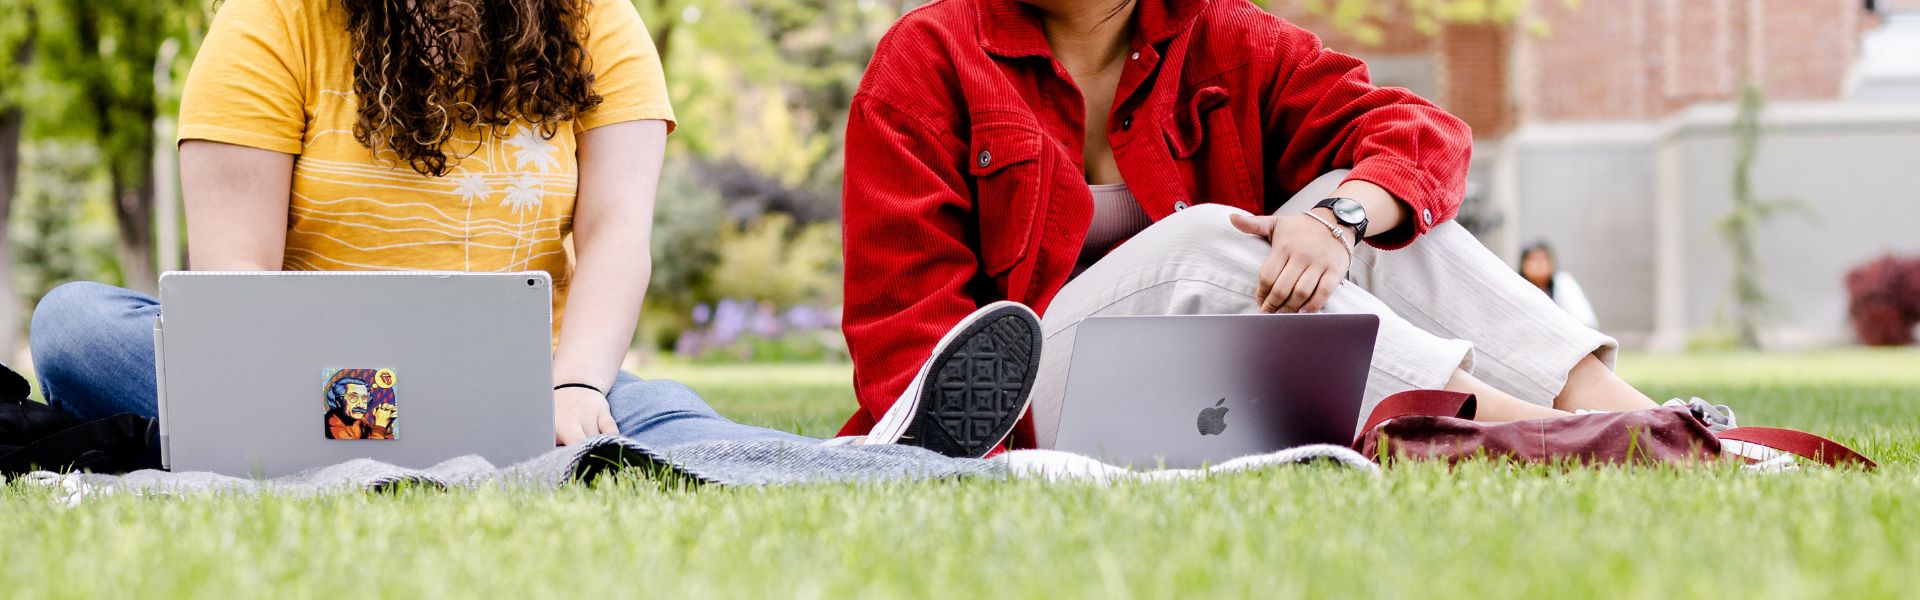 image of two girls, one in a yellow shirt and the other in a red jacket, sitting on the grass with their laptops open in front of them.